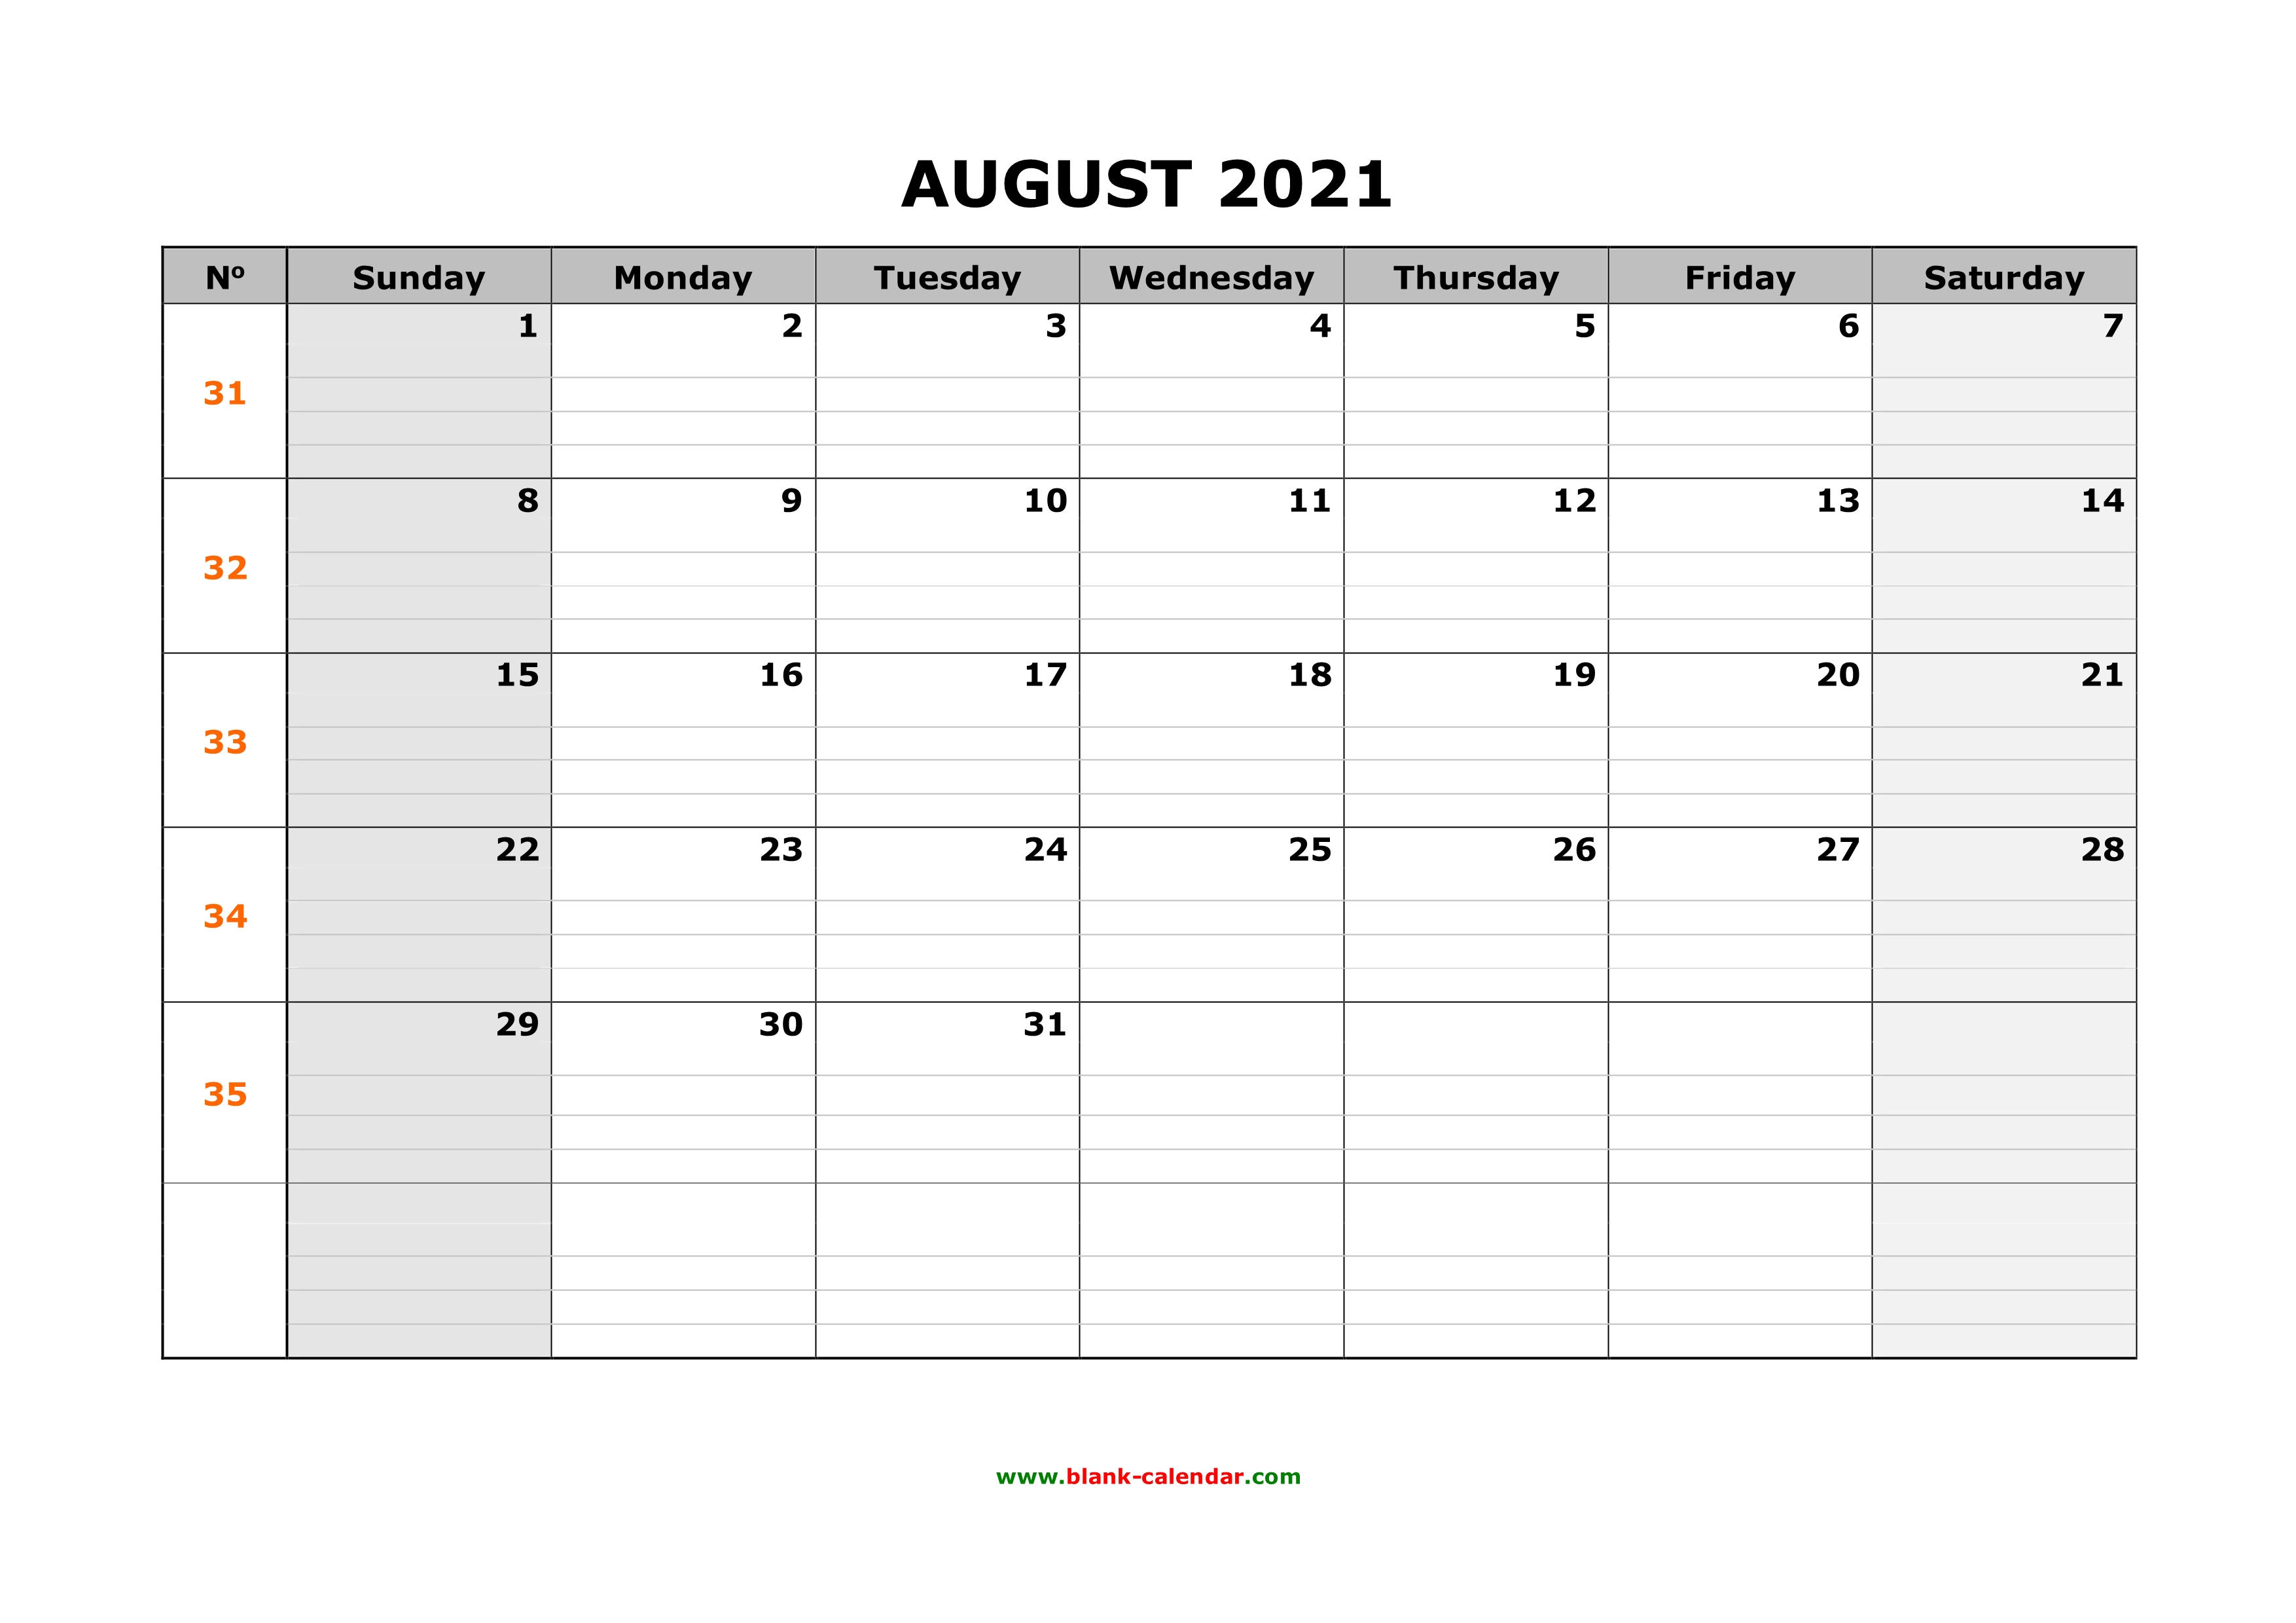 free download printable august 2021 calendar large box grid space for notes